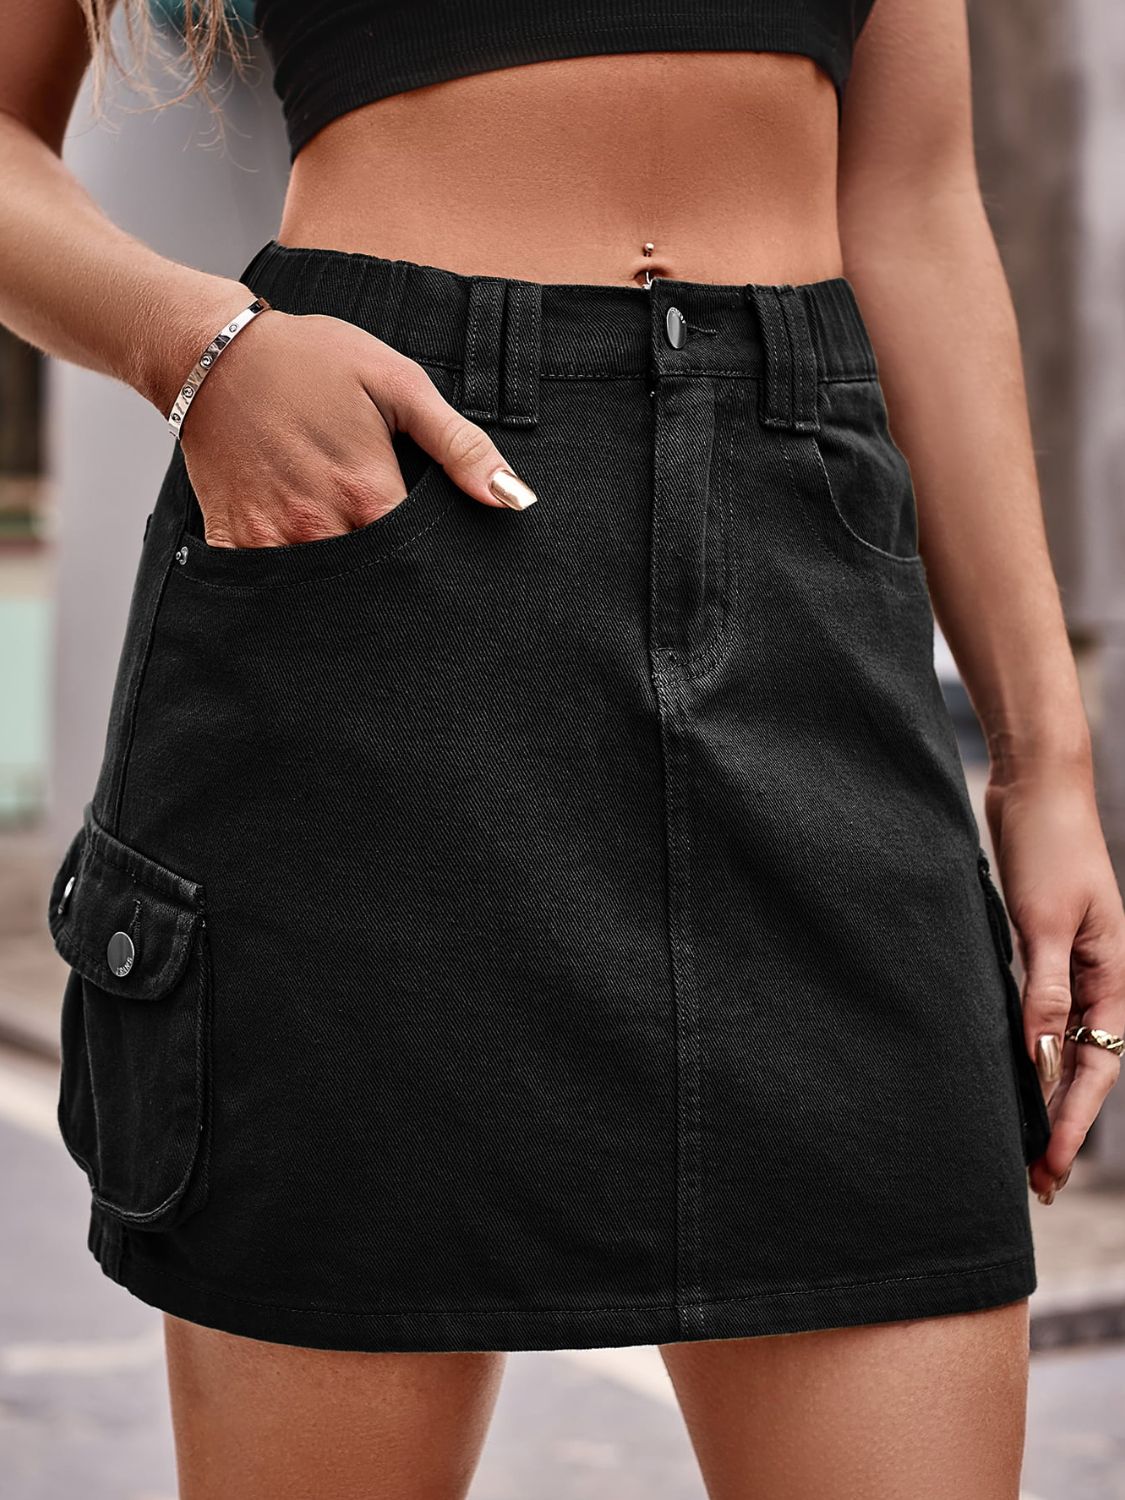 alamaula.com - Online shopping for Denim Skirts with fast US shipping.